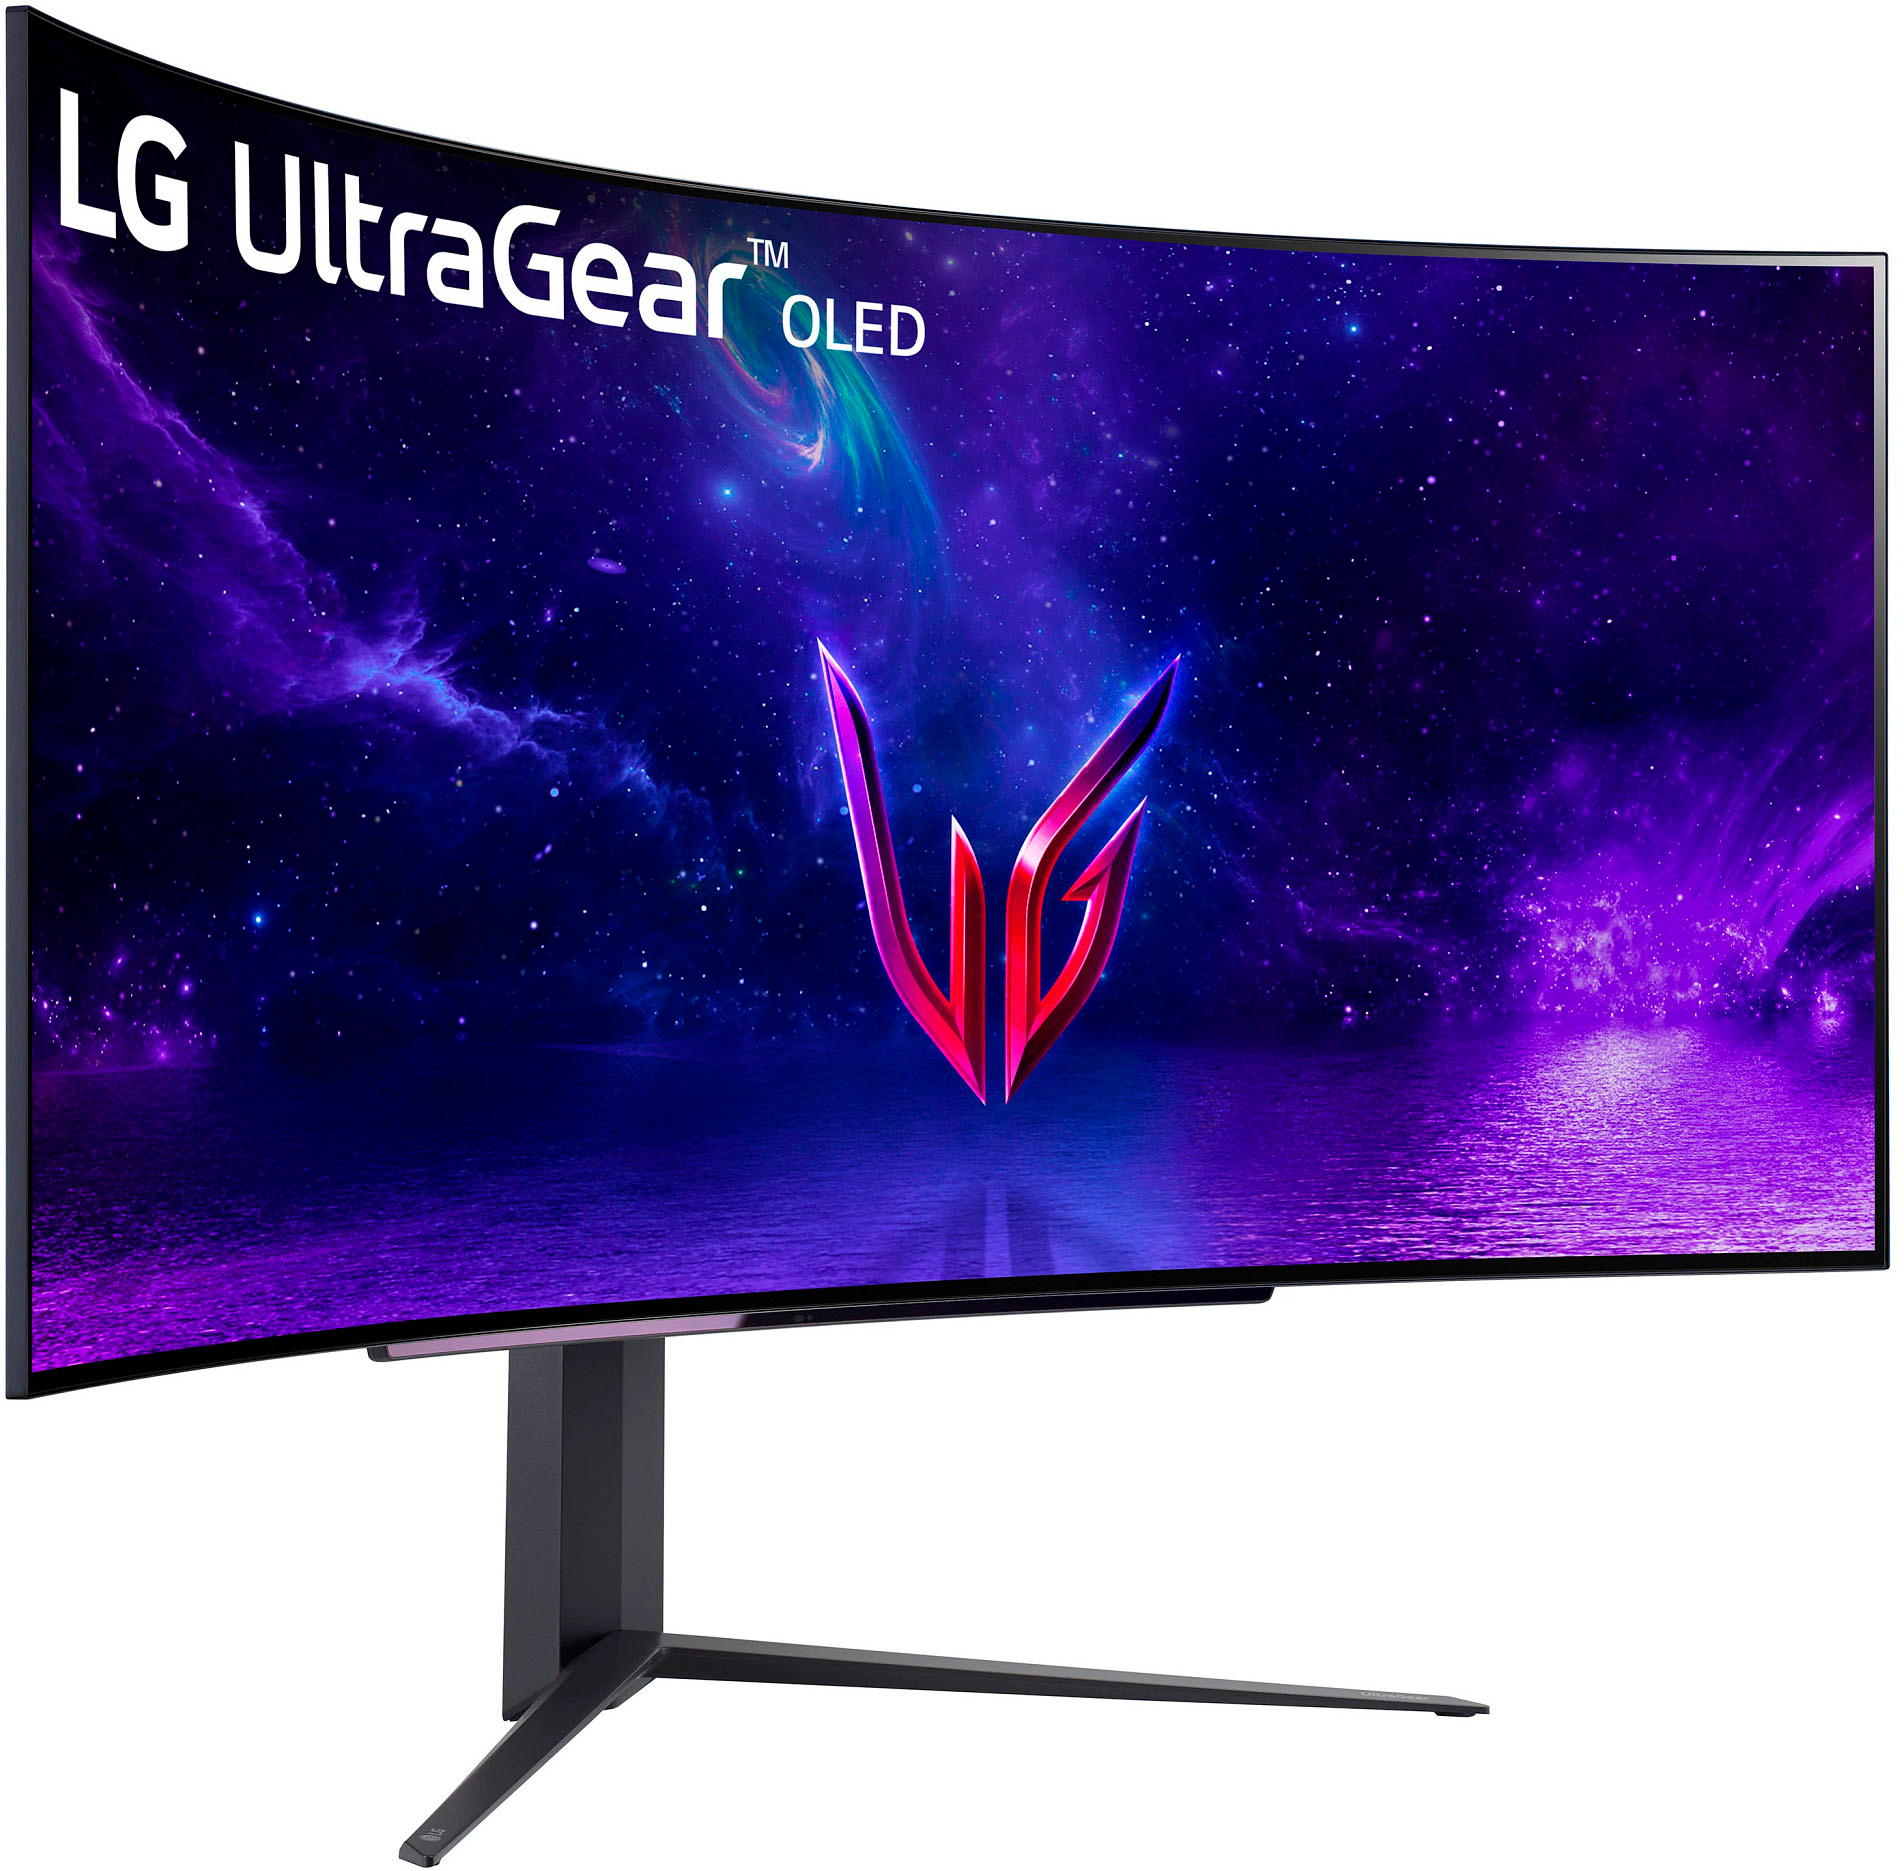 Back View: LG - UltraGear 45” OLED Curved WQHD 240Hz 0.03ms FreeSync and NVIDIA G-Sync Compatible Gaming Monitor with HDR10 - Black